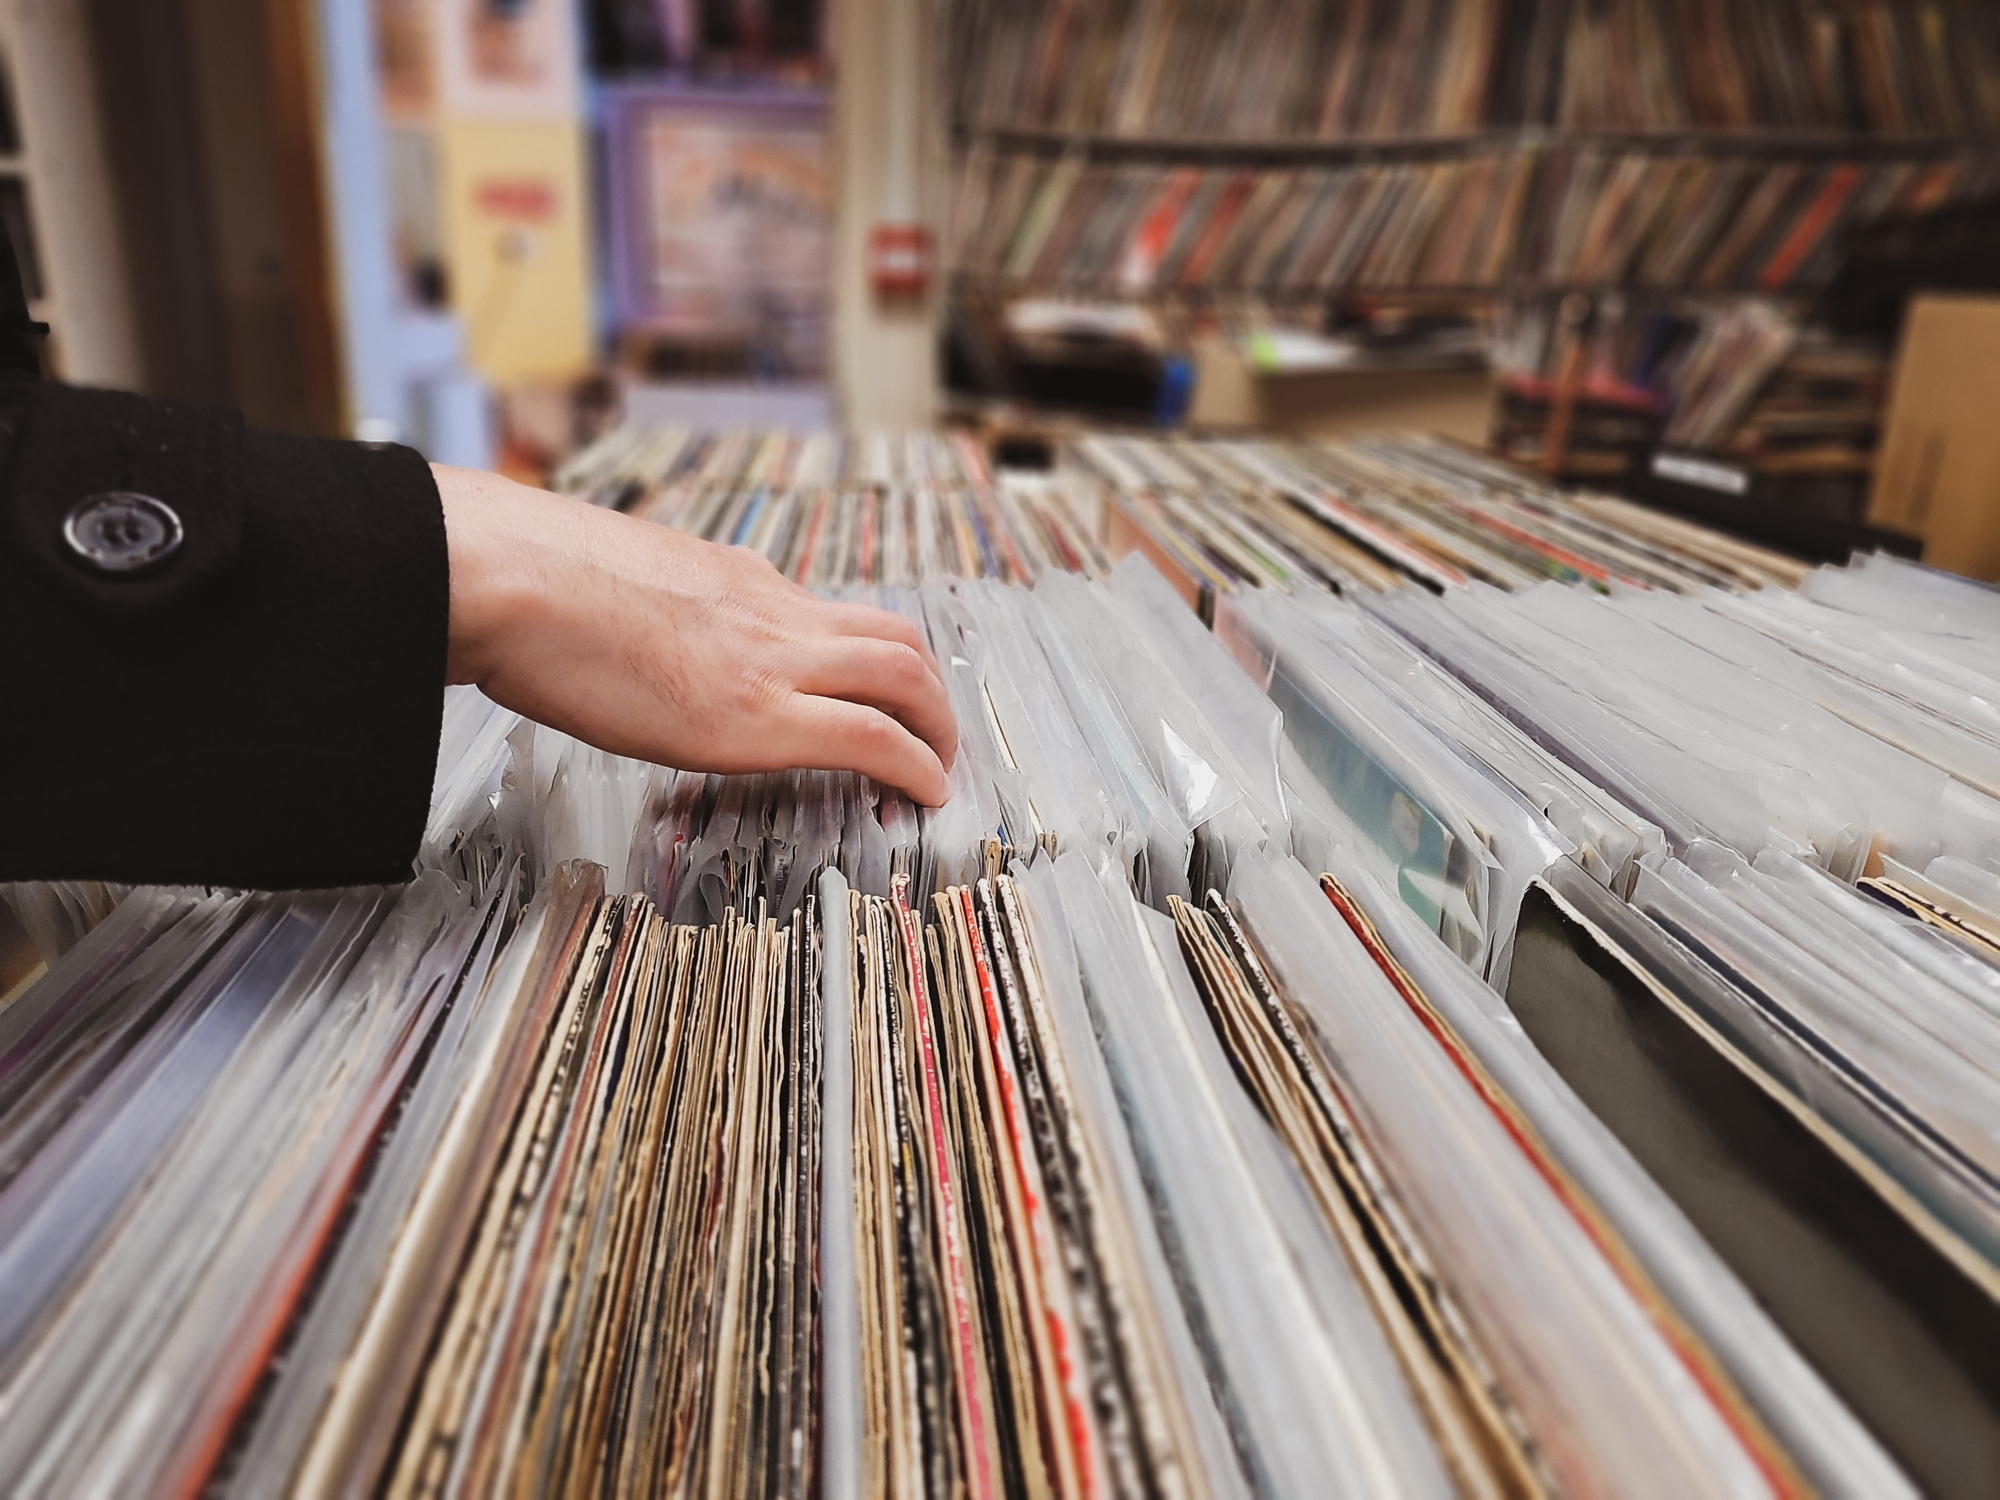 A person rifling through stacks of LPs in a store